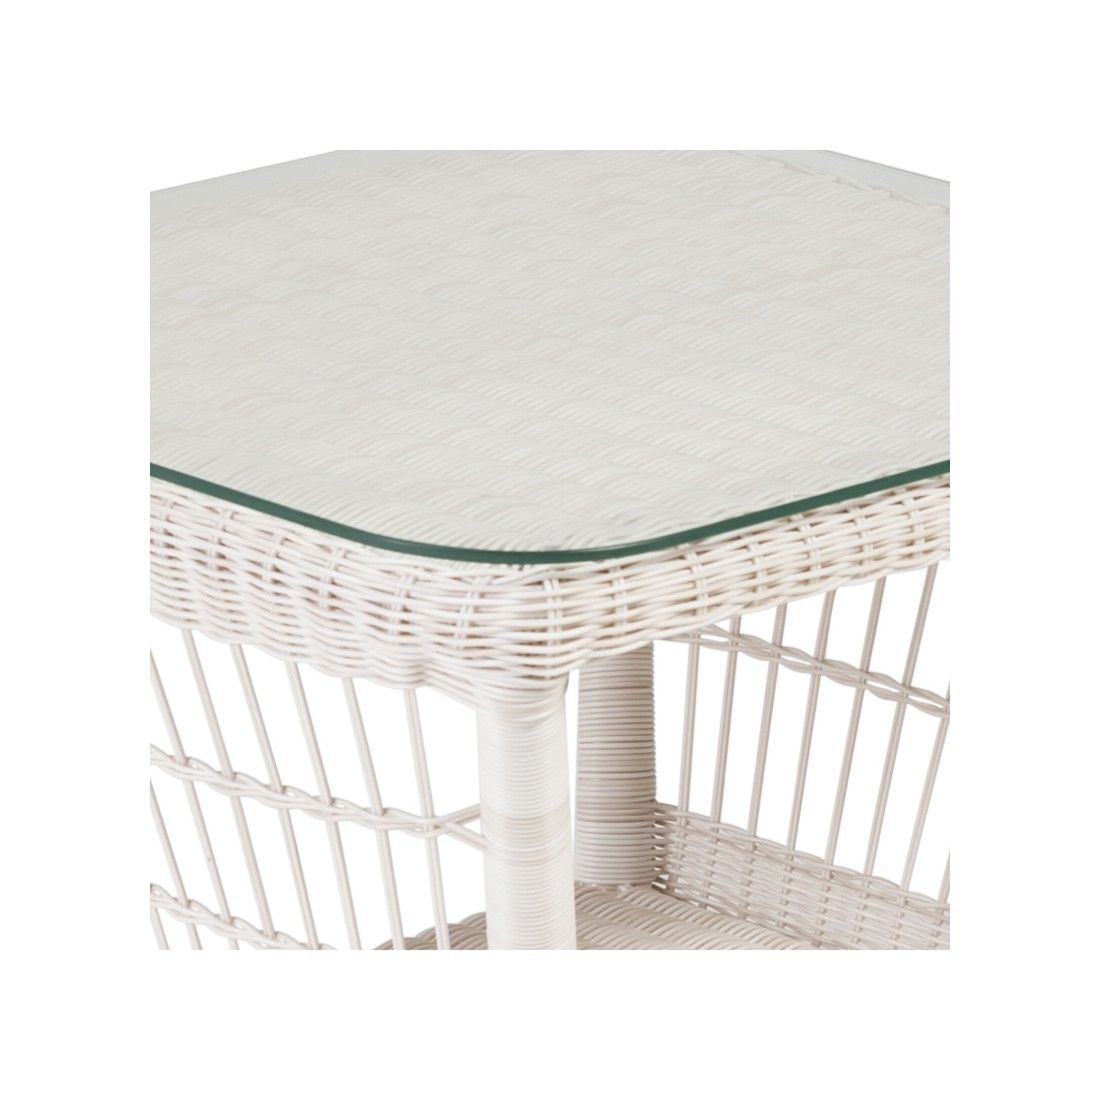 Optional Glass Top For The Antibes Or Biarritz Small Coffee Table Pertaining To Glass Top Coffee Tables (View 6 of 20)